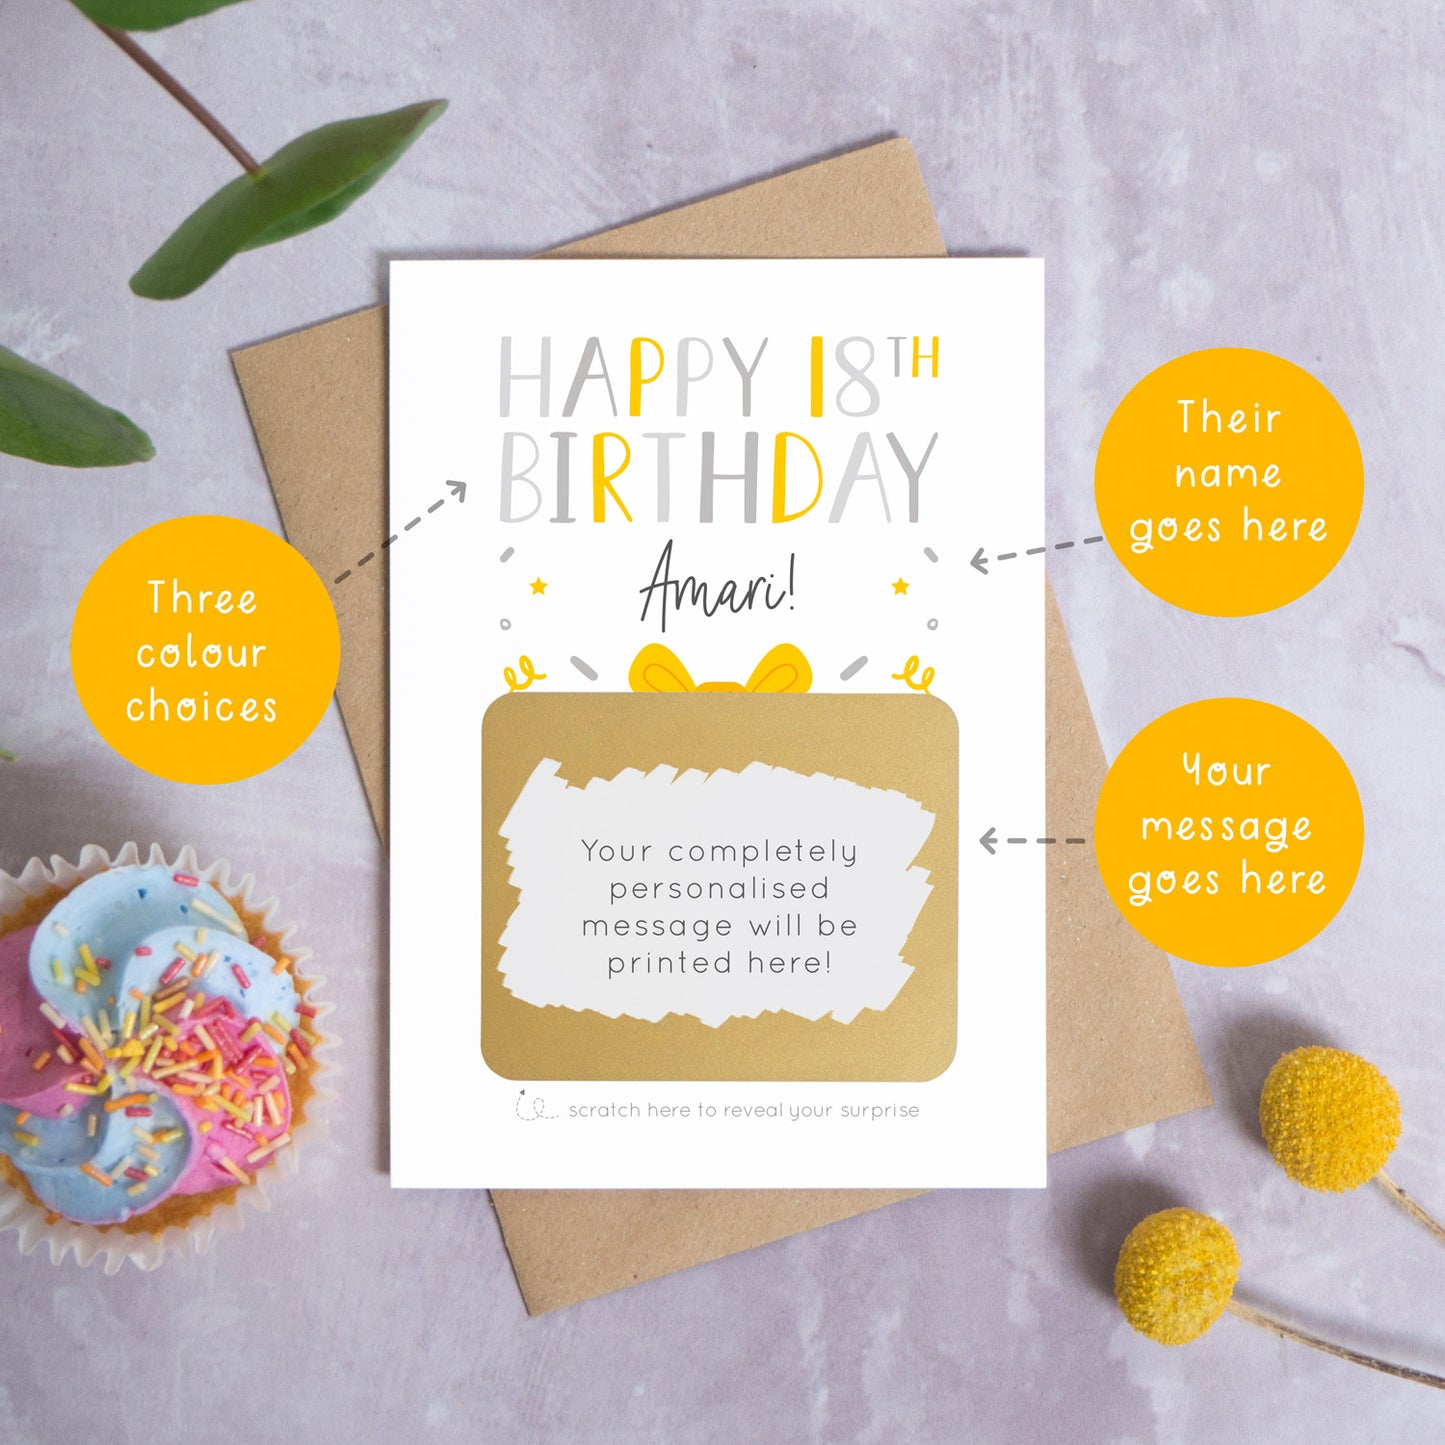 A personalised happy 18th birthday scratch card in grey that has been photographed on a grey background with foliage and a cupcake. There are also orange circles laid over the top of this image with arrows pointing to the areas that can be customised. In this instance they point to the name, the colour choices and the personalised scratch off message.